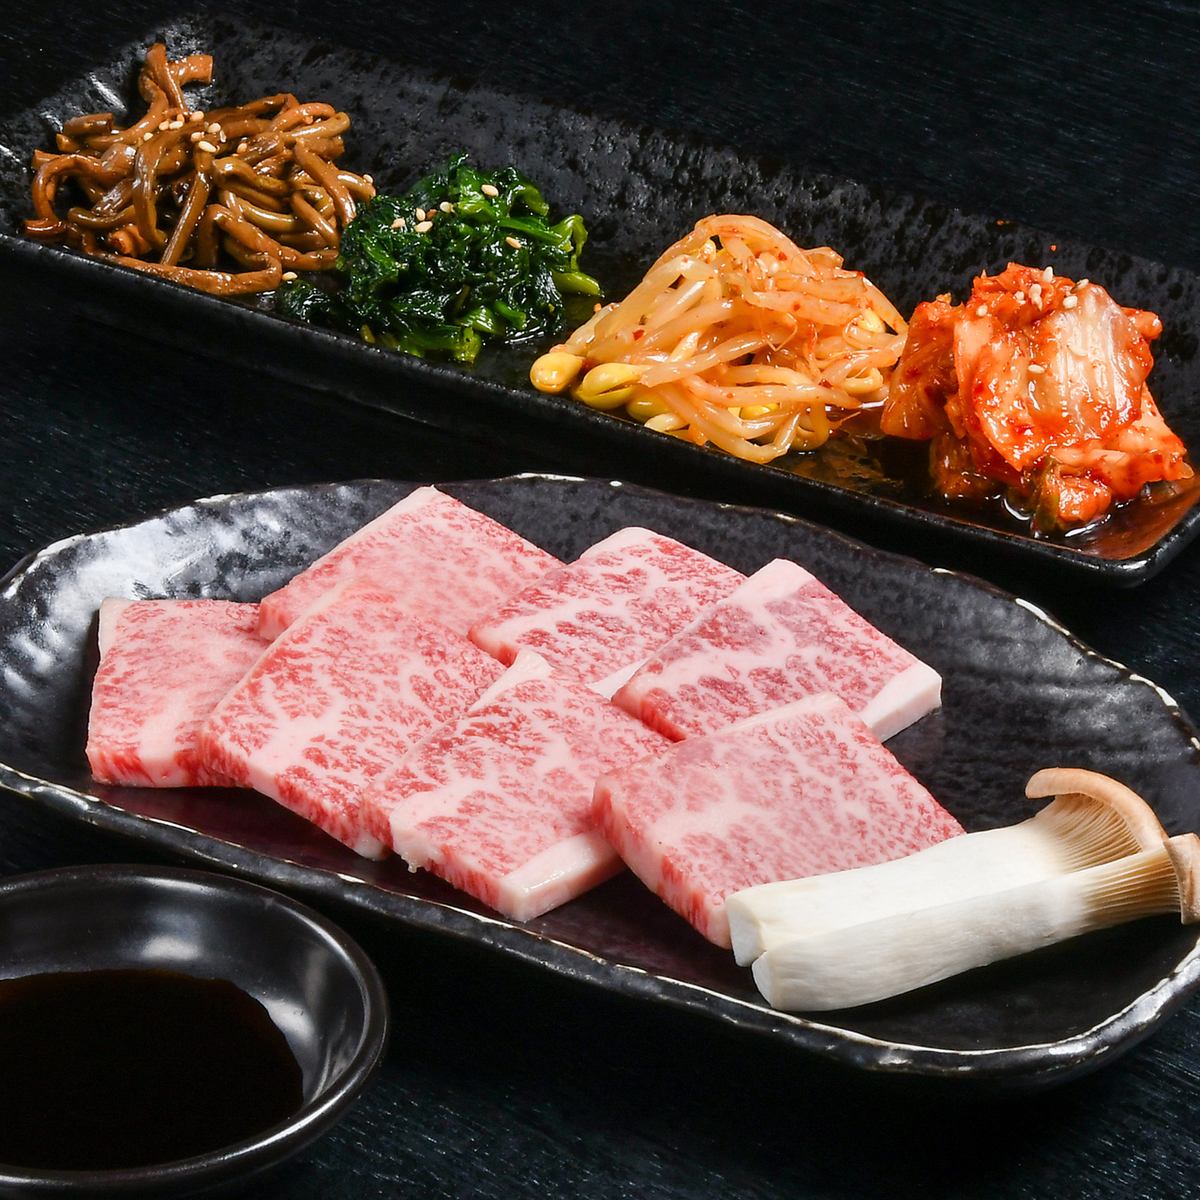 High-quality and reasonably priced meat that can only be provided by a directly managed butcher shop♪